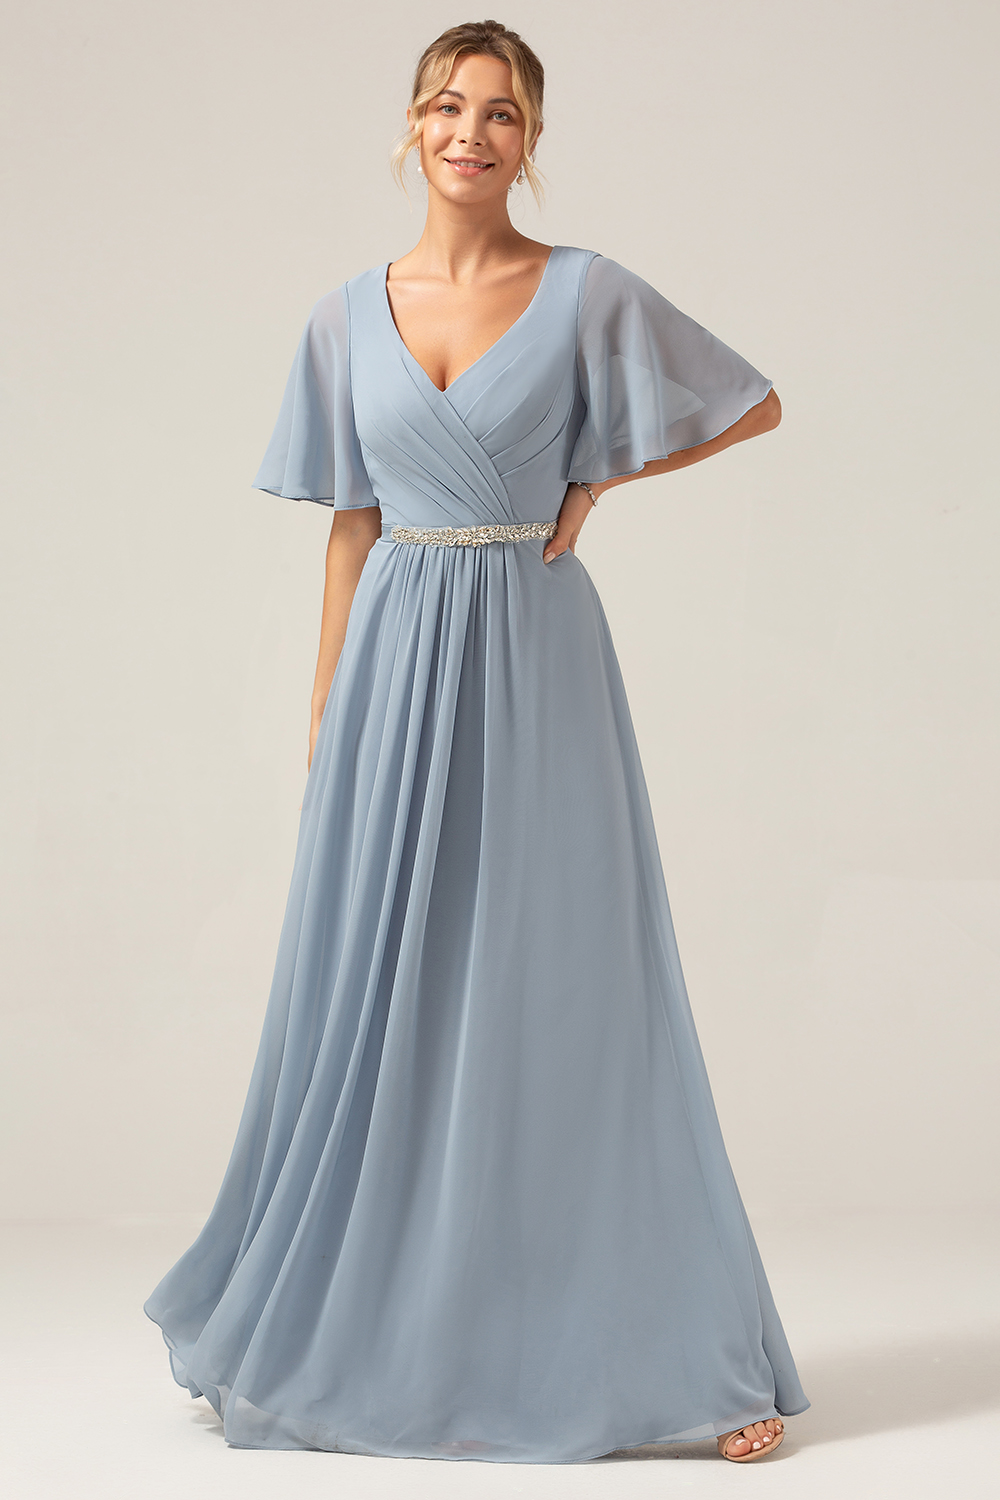 Dusty Blue A Line Chiffon V Neck Mother of Bride Dress with Short Sleeves